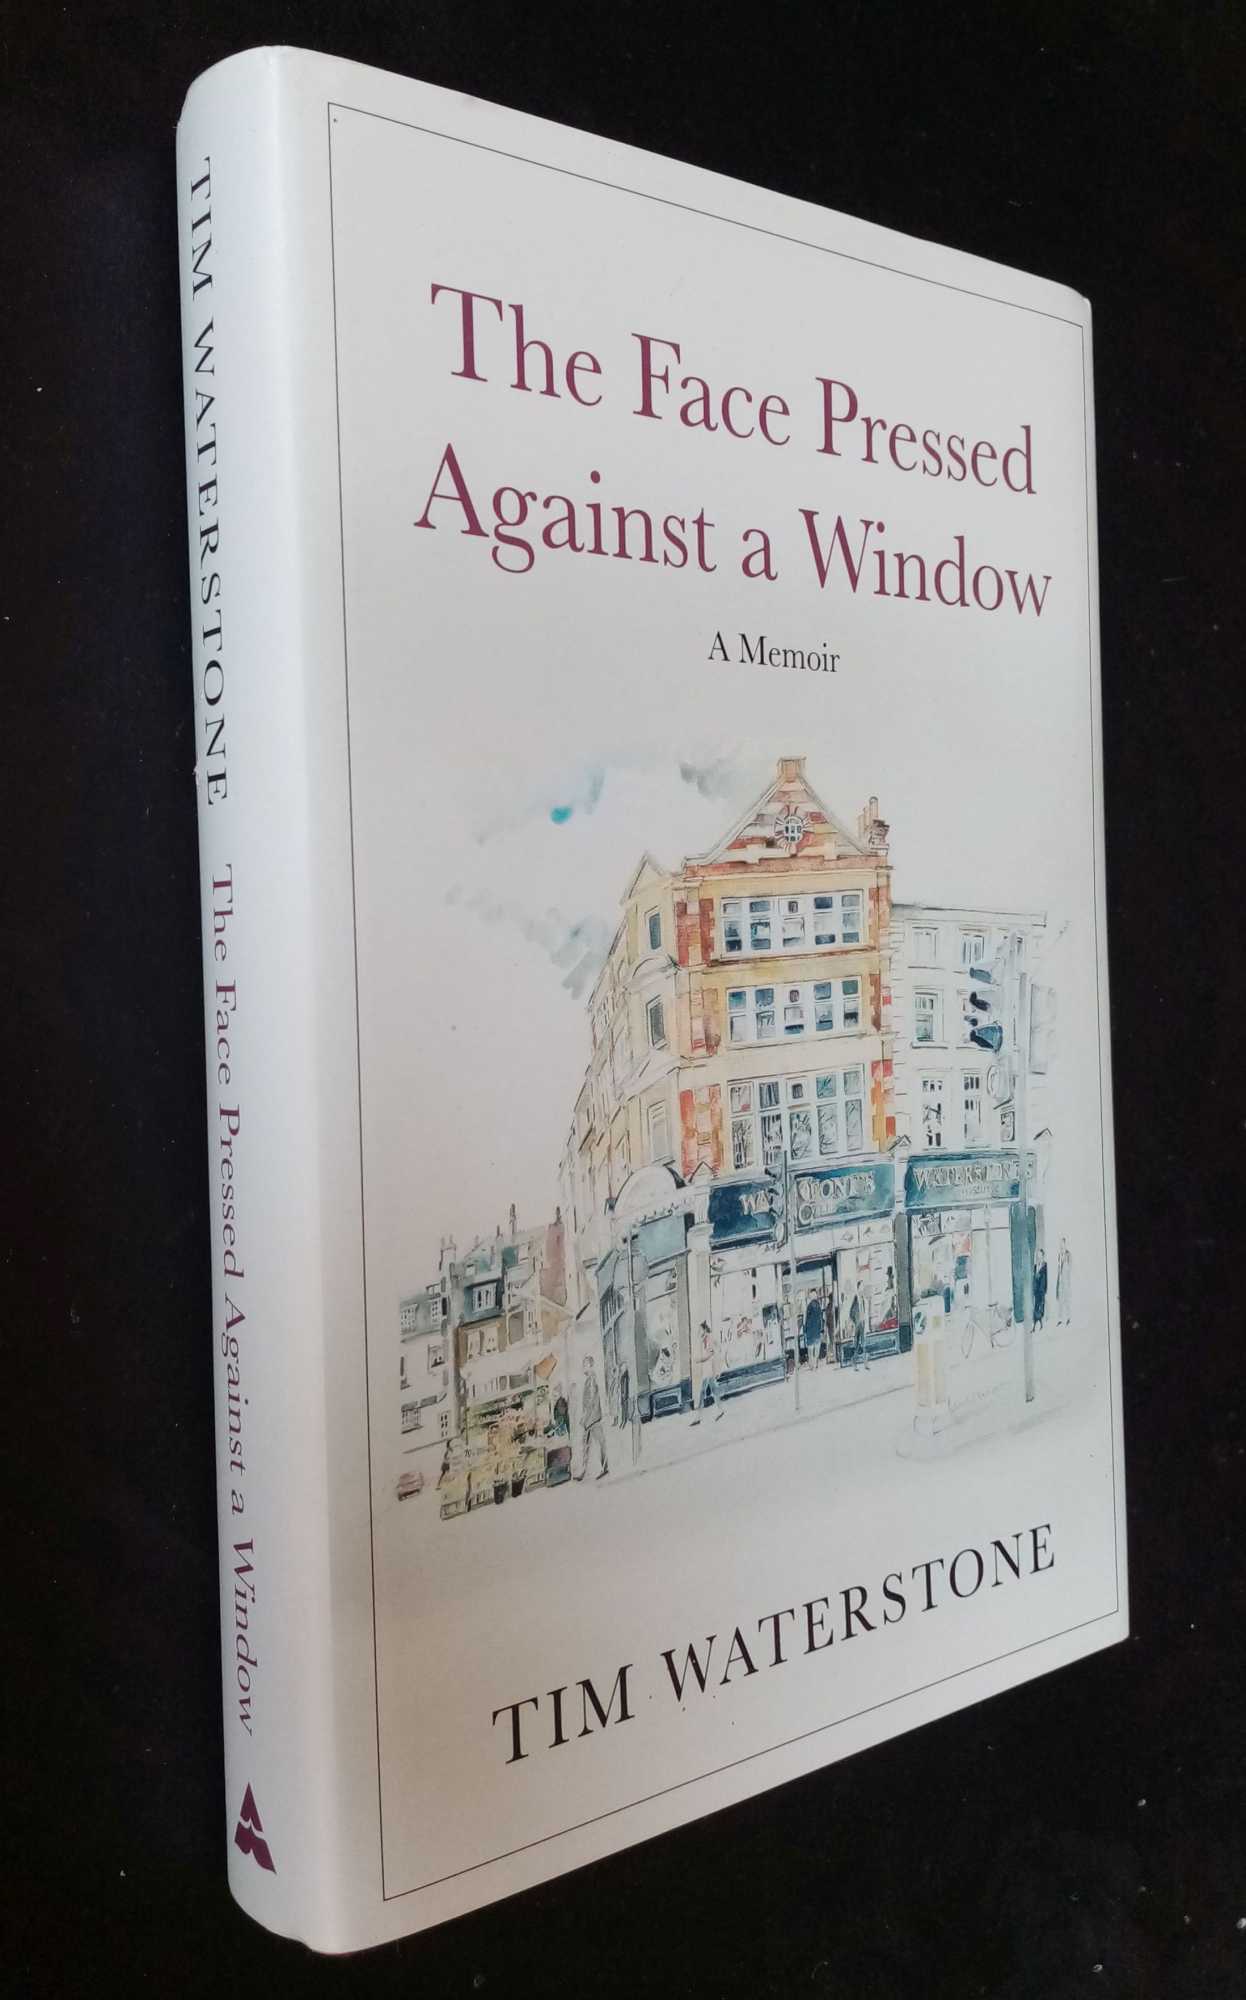 Tim Waterstone - The Face Pressed Against a Window: A Memoir   SIGNED/Inscribed